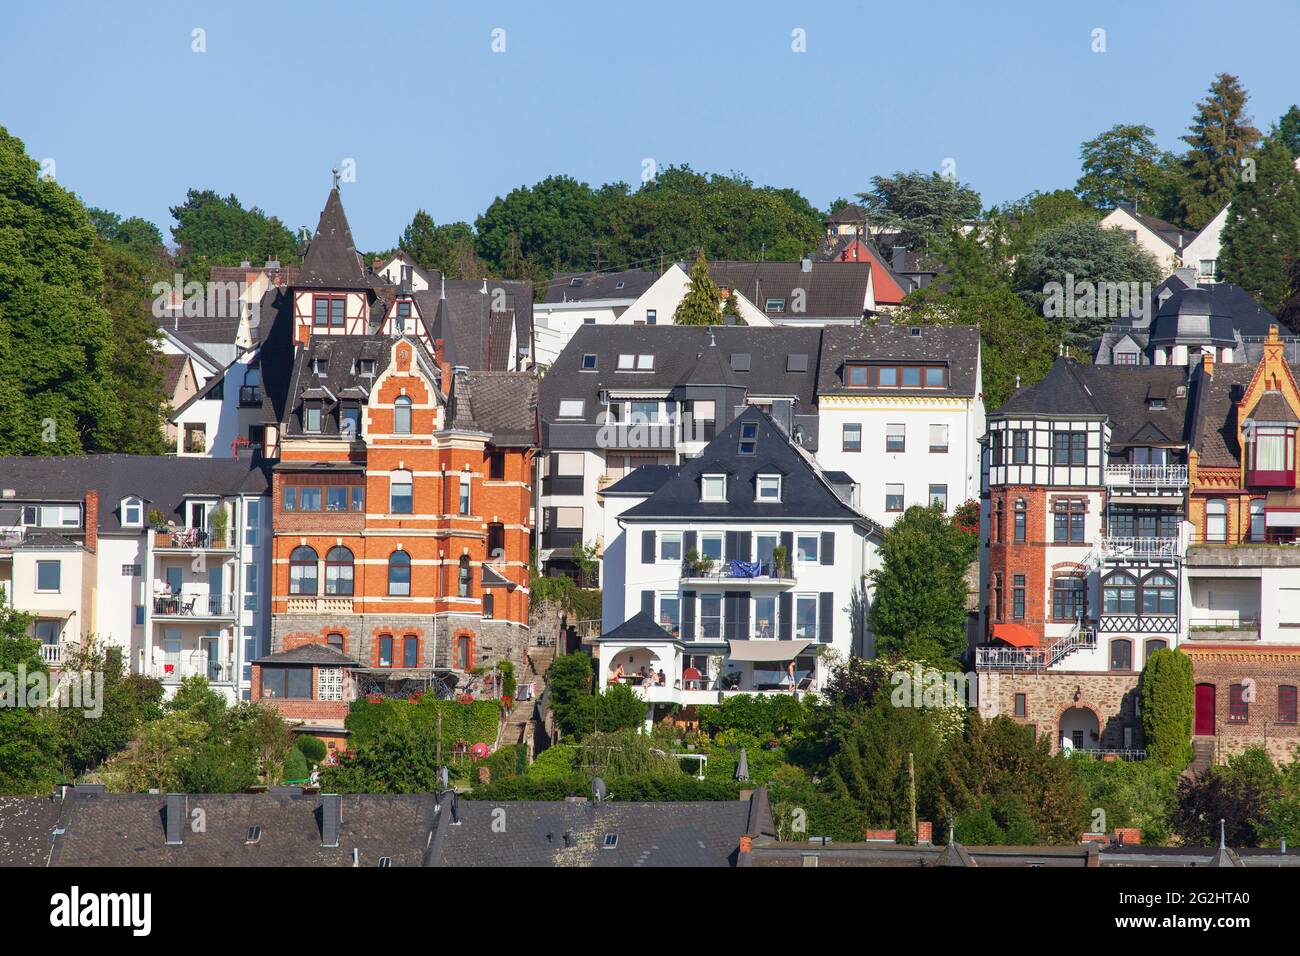 Residential buildings in the Pfaffendorf district, Koblenz, Rhineland-Palatinate, Germany, Europe Stock Photo